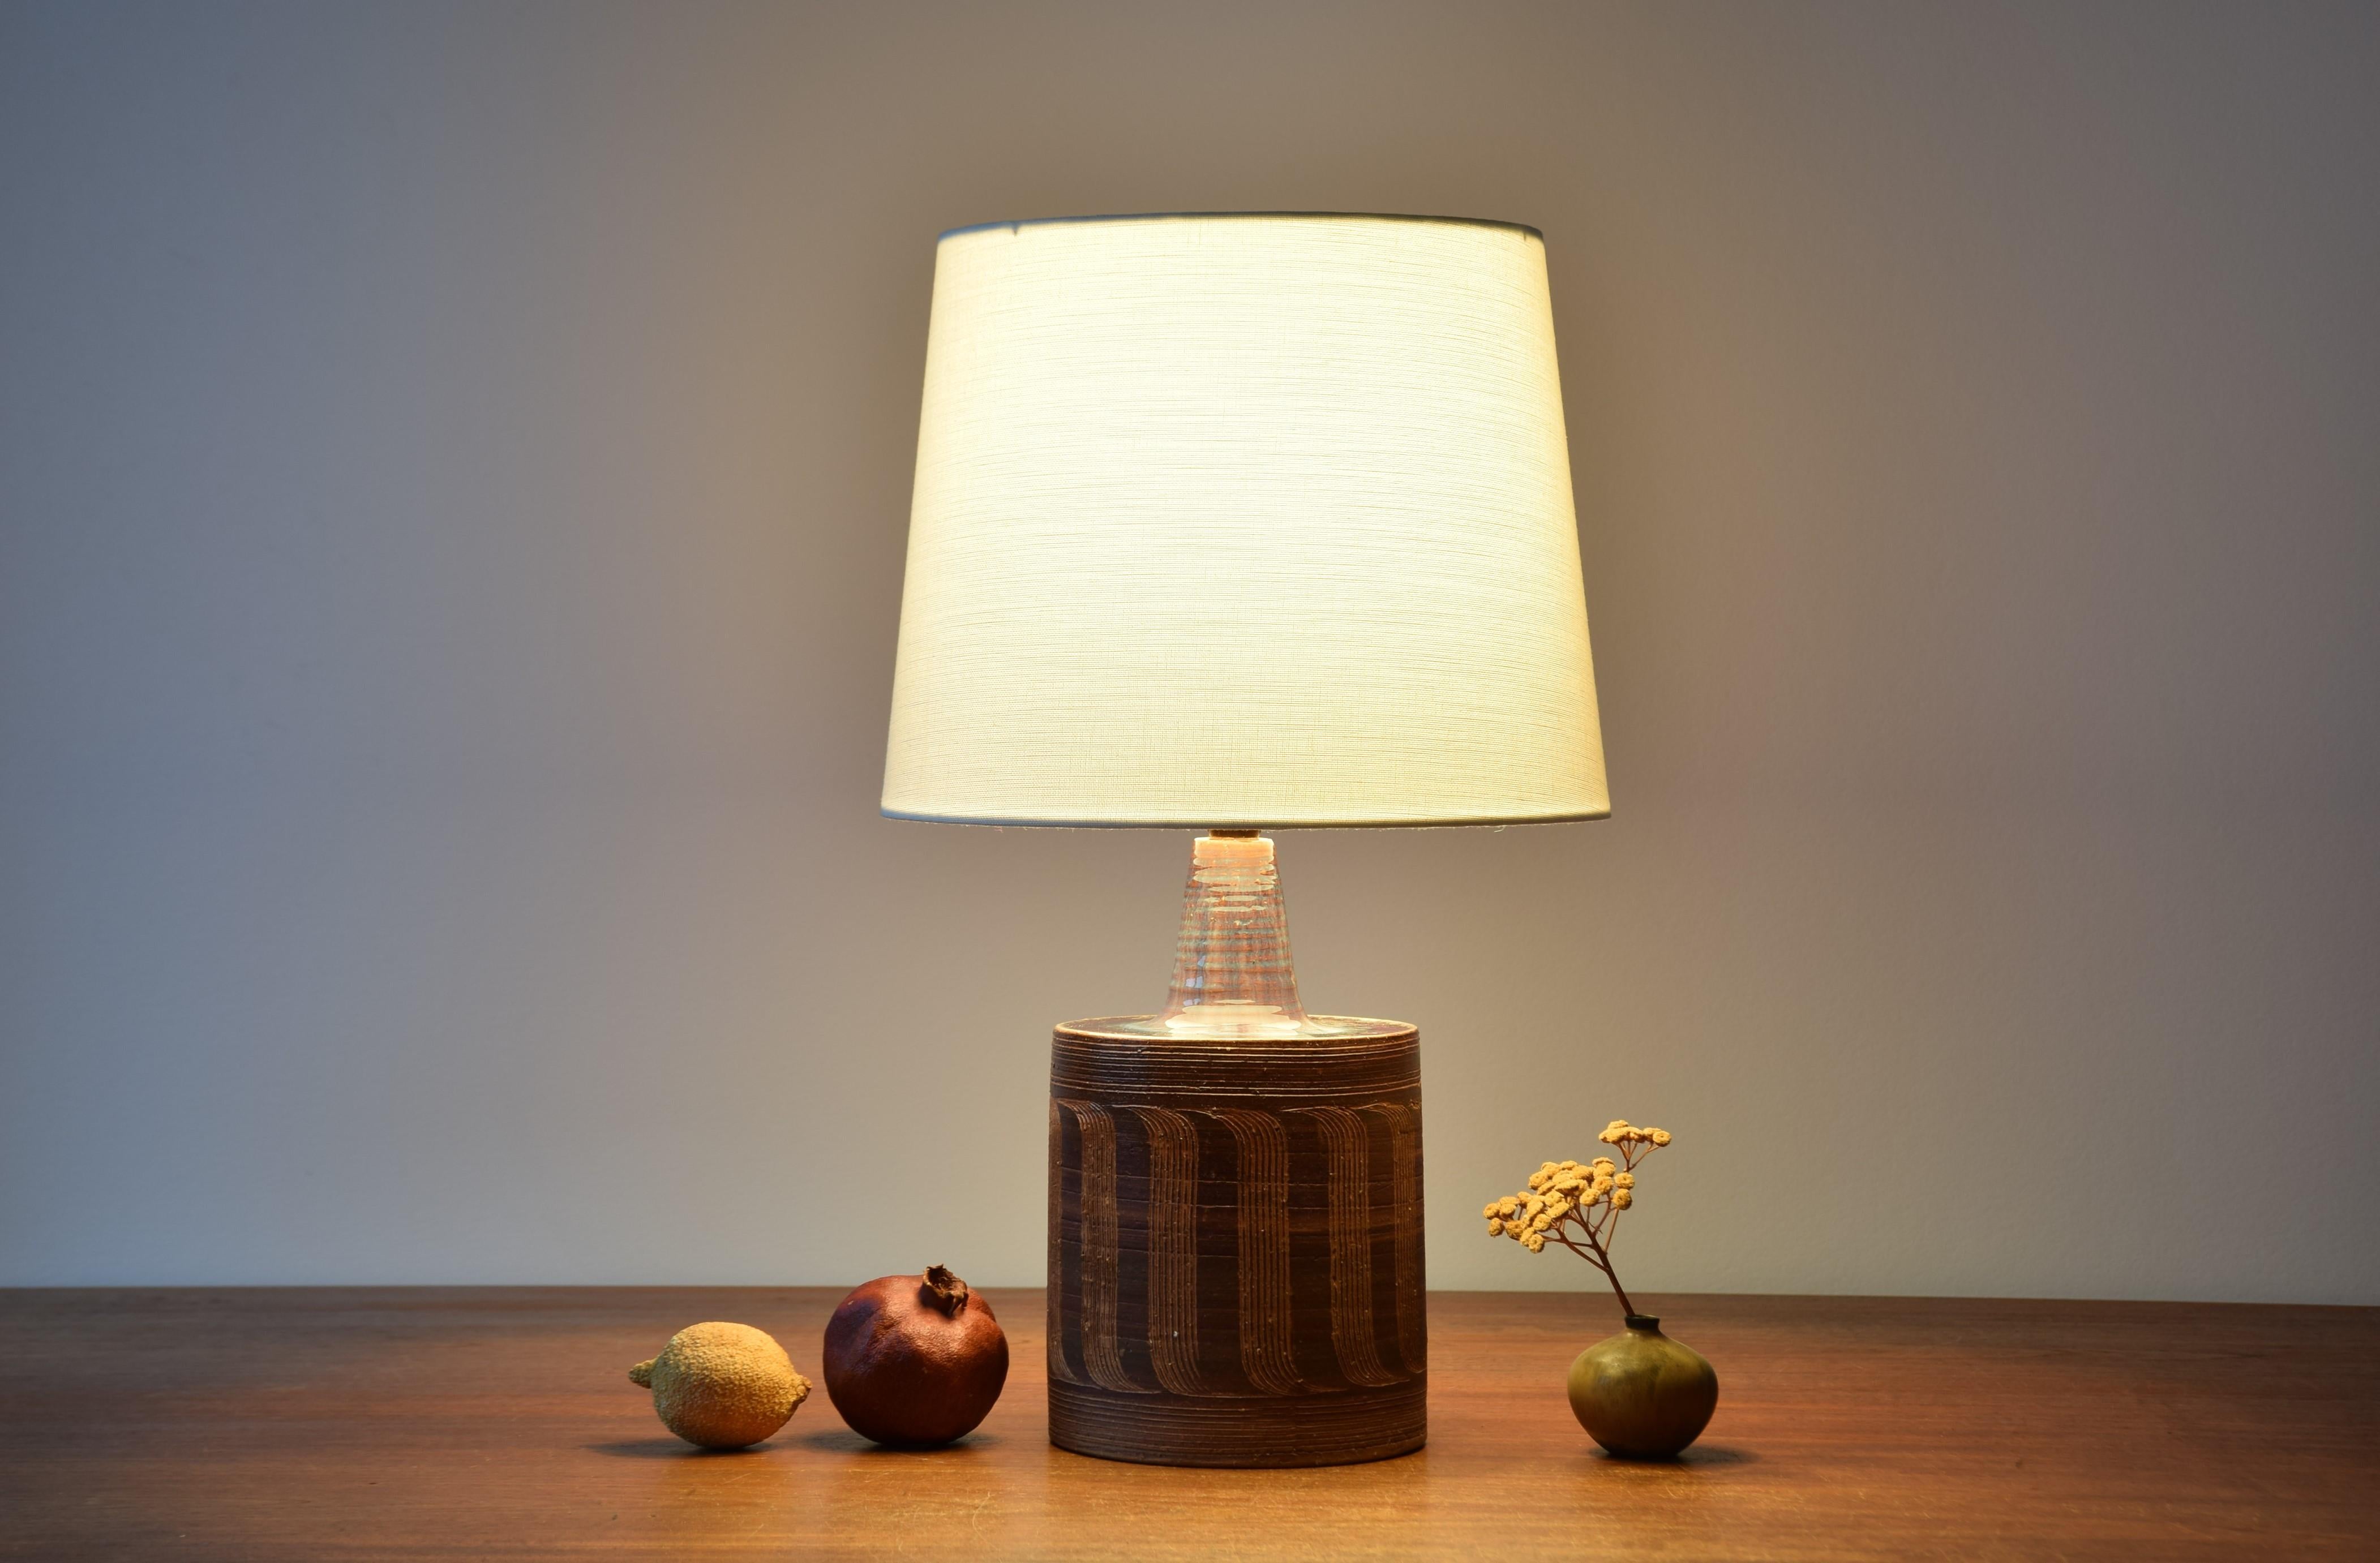 Midcentury Danish table lamp by Danish ceramist Jytte Trebbien. It´s from her own studio. Made circa 1960s. The neck and shoulders are covered with subtle glaze colors in shades of bordeaux and purple. The body is decorated with a repeated fine